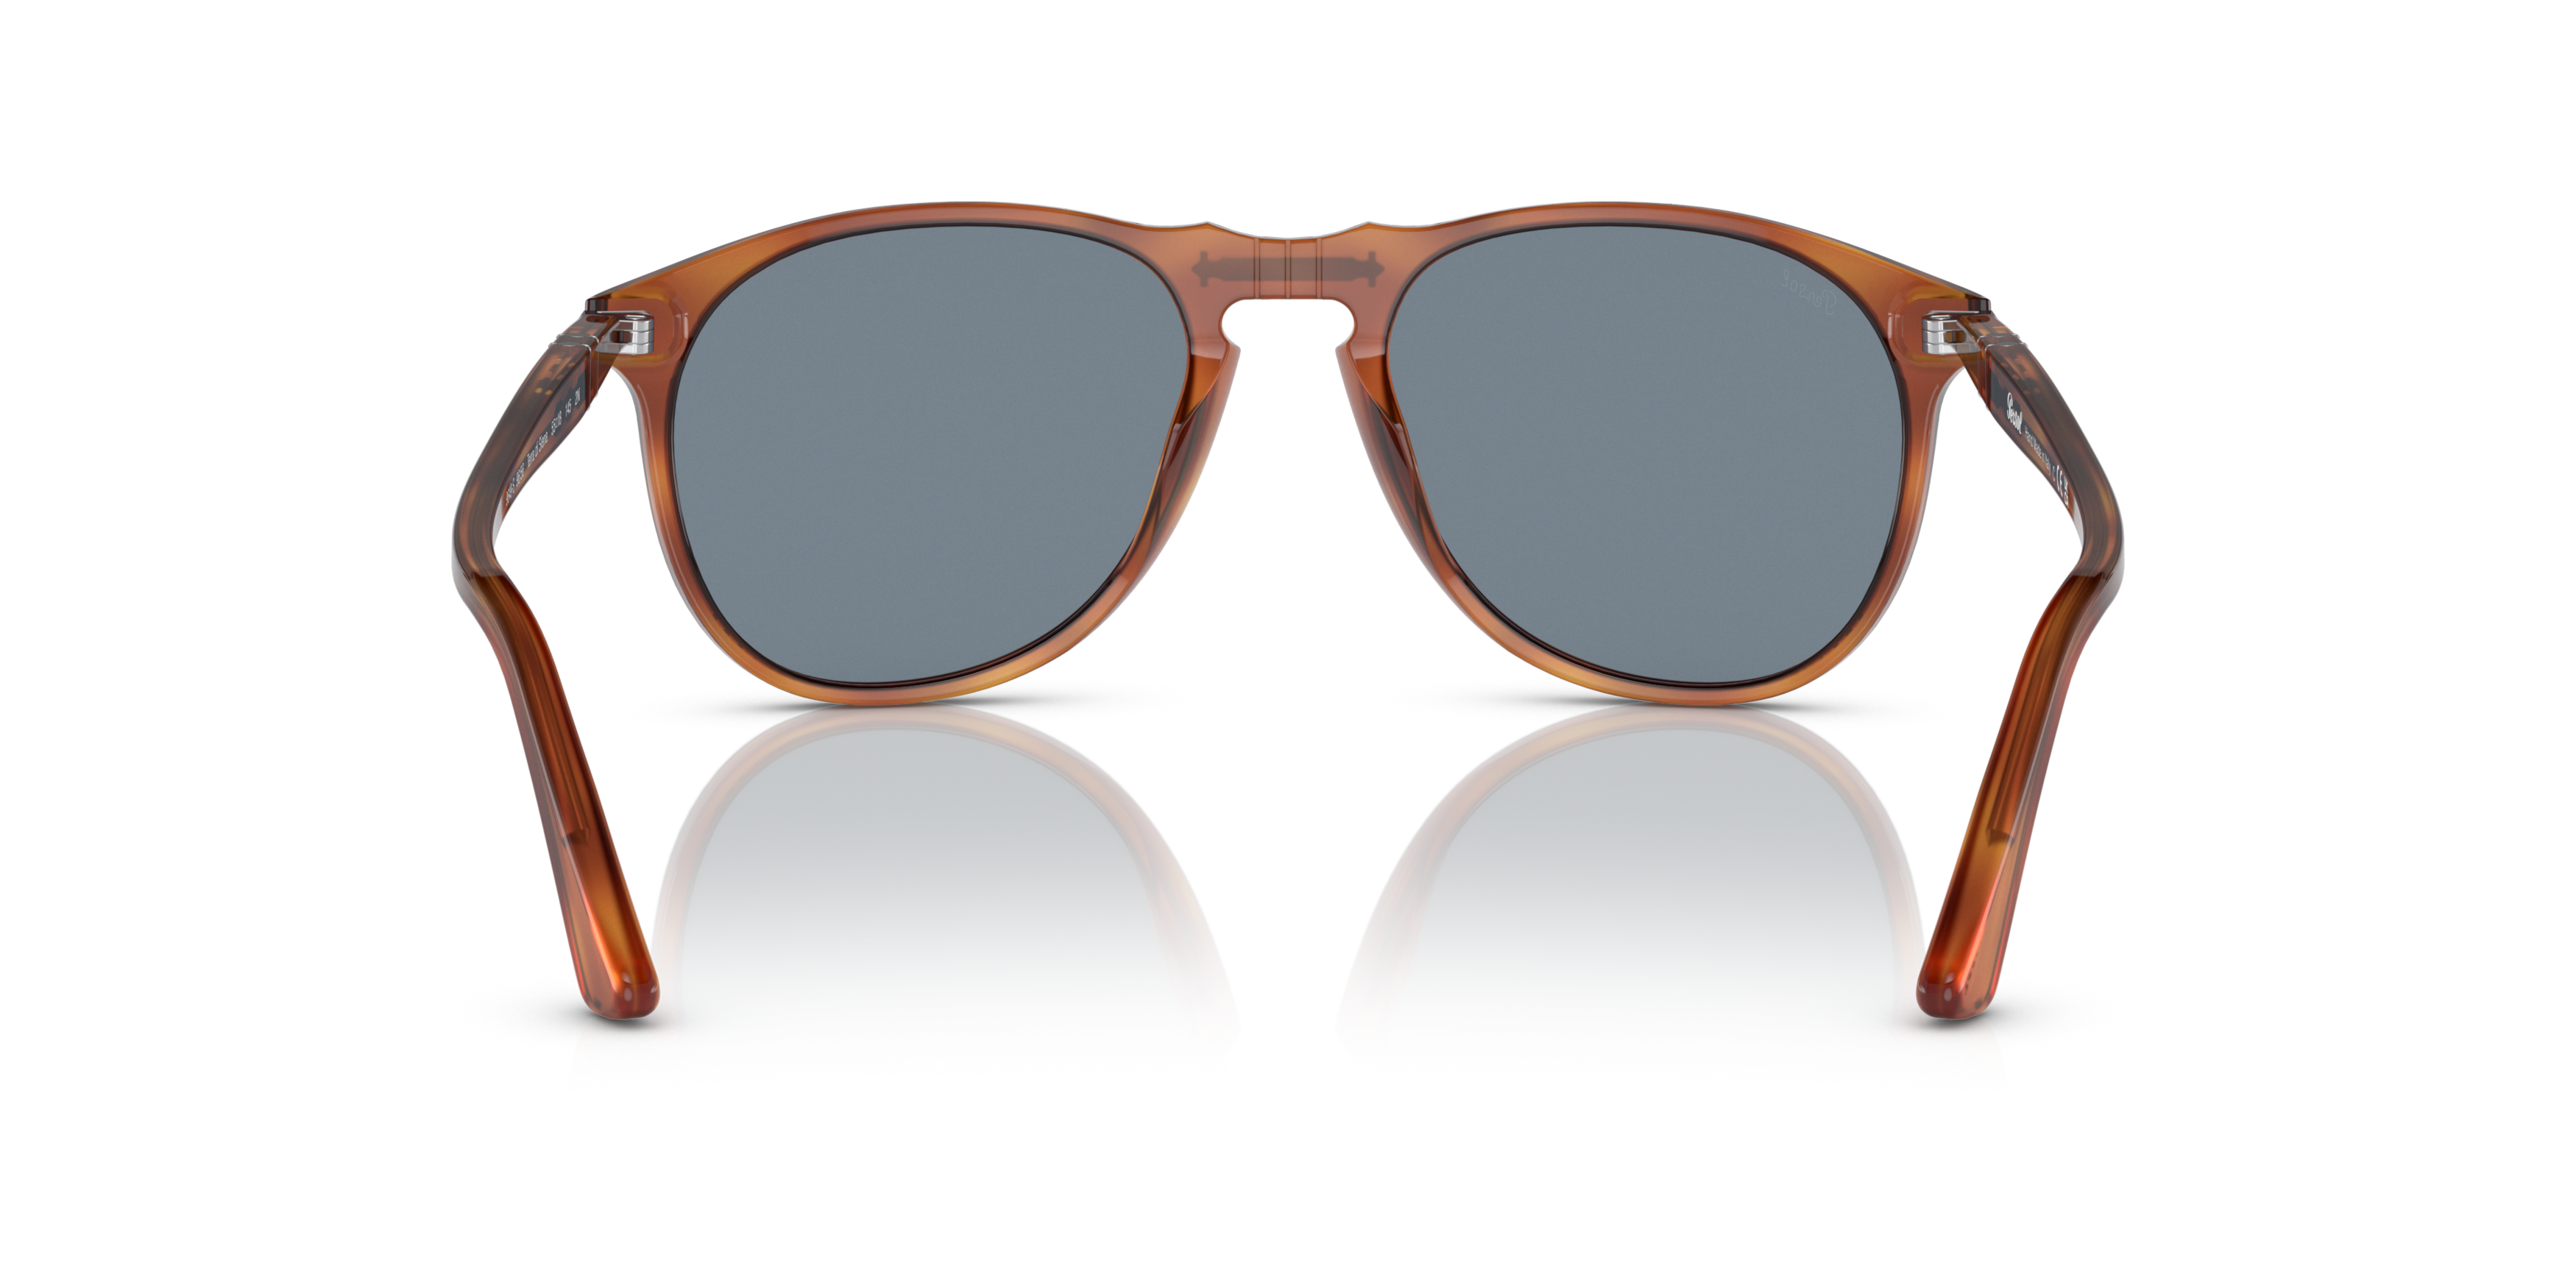 [products.image.detail02] Persol 0PO9649S 96/56